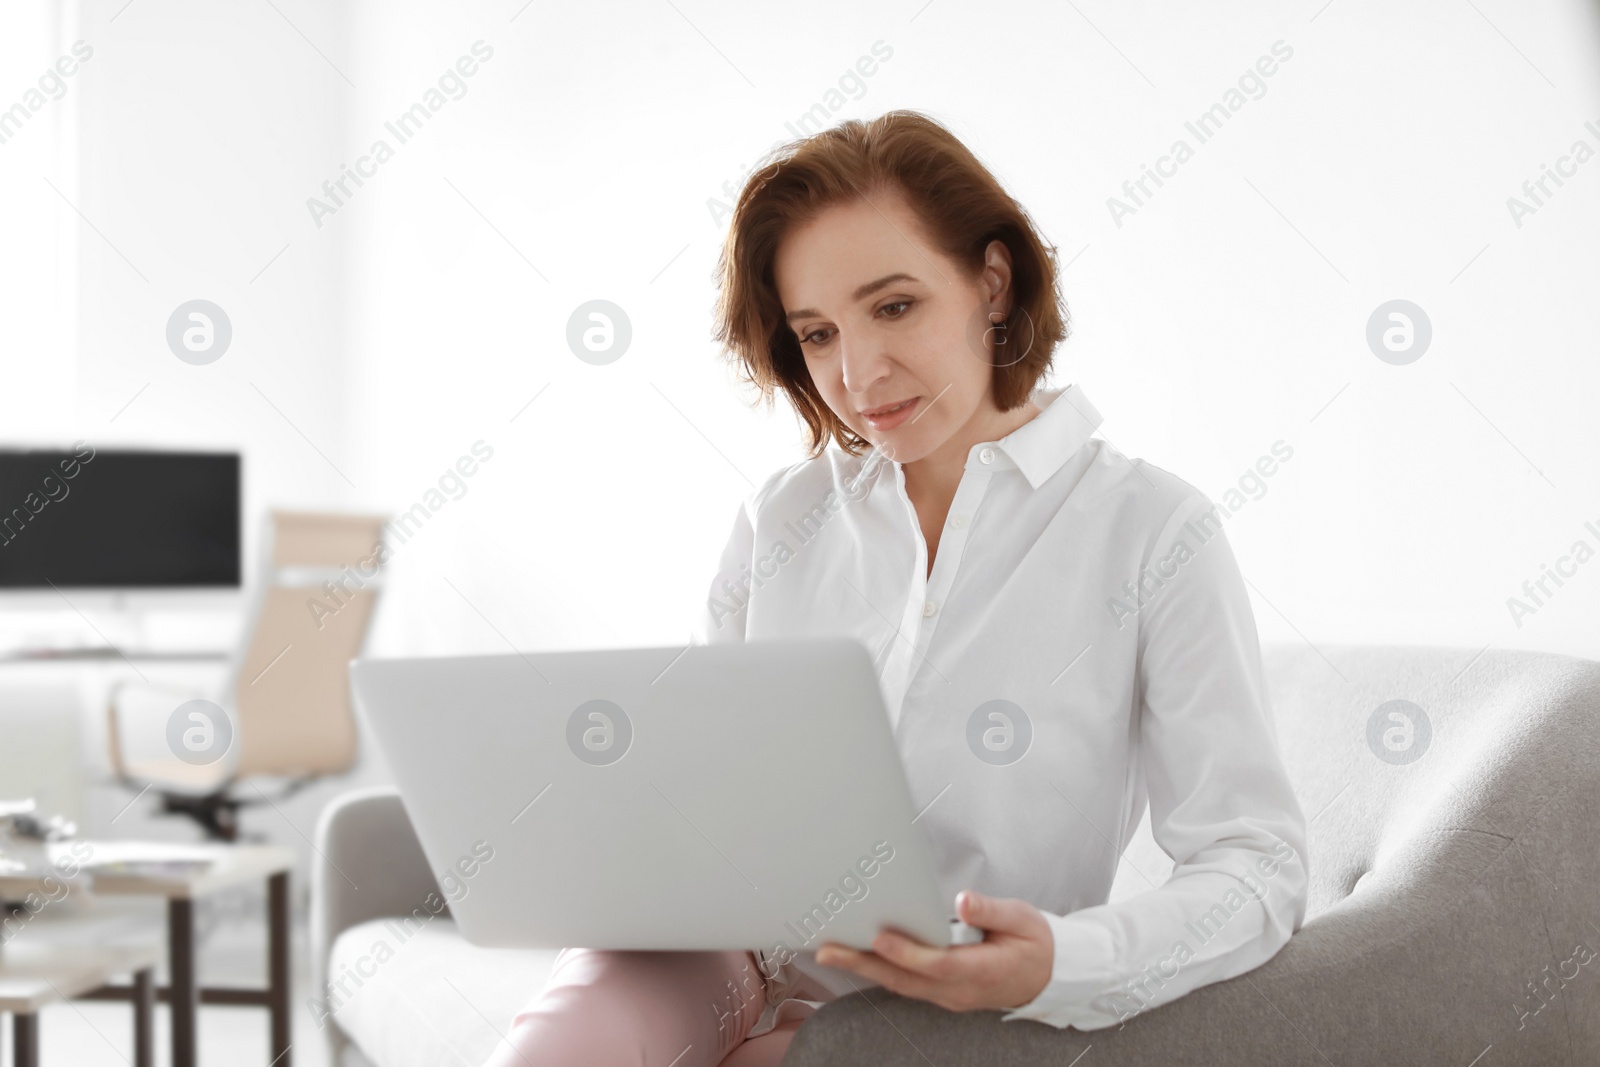 Photo of Female lawyer working with laptop in office